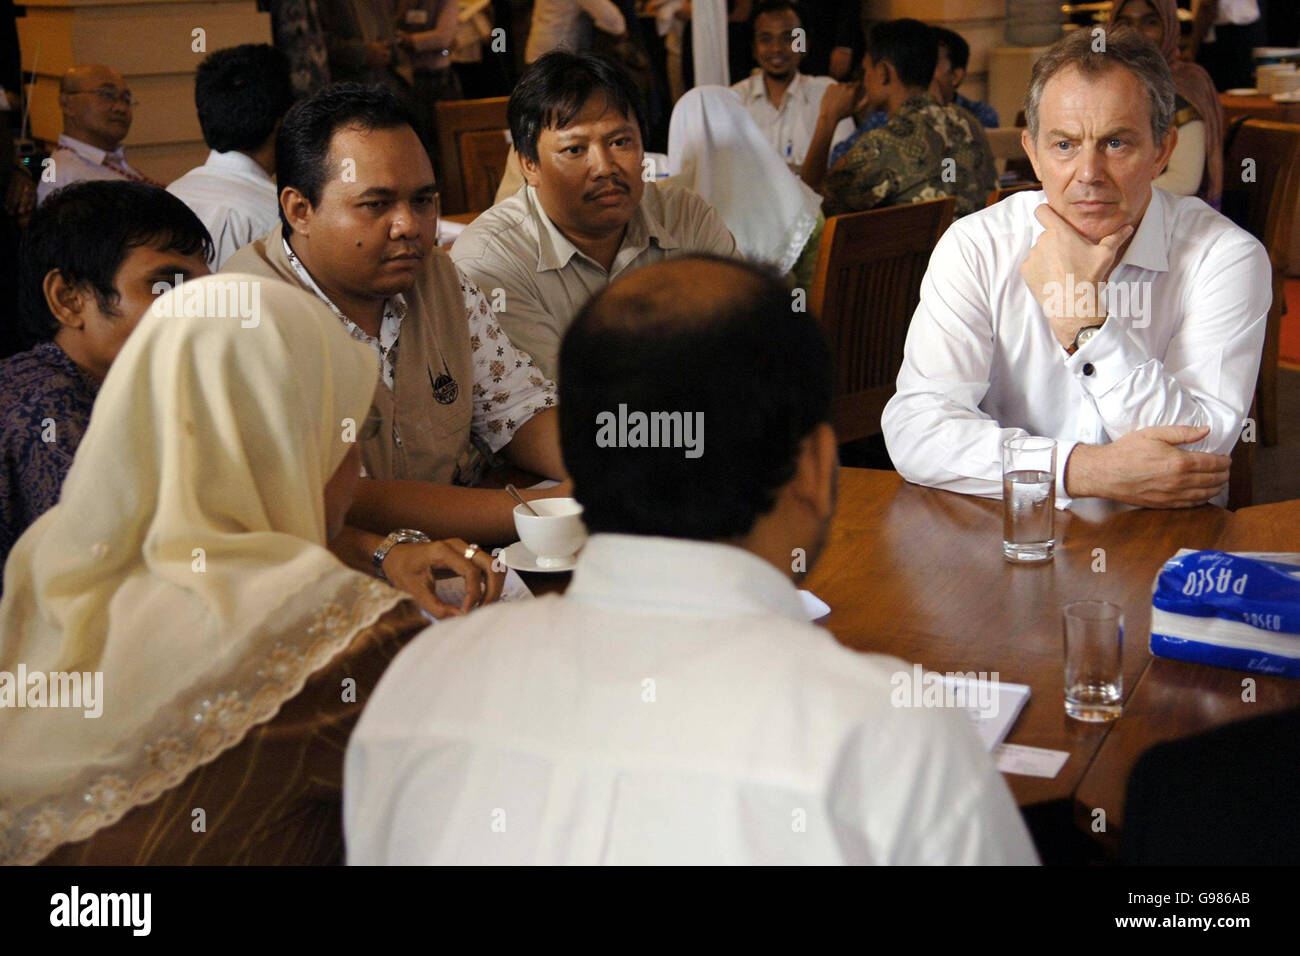 Britain's Prime Minister Tony Blair meets widows of the tsunami disaster and the civil war in Aceh province, Indonesia, Thursday March 30, 2006. Mr Blair today pledged to work more closely with the world's largest Muslim country in the fight against terrorism but Indonesian Muslim leaders told him his policies were breeding extremism. Mr Blair, accompanied by his wife Cherie, touched down in the capital Jakarta last night on the last leg of a marathon seven-day diplomatic mission. See PA story POLITICS Blair. PRESS ASSOCIATION photo. Photo credit should read: Stefan Rousseau/PA. Stock Photo